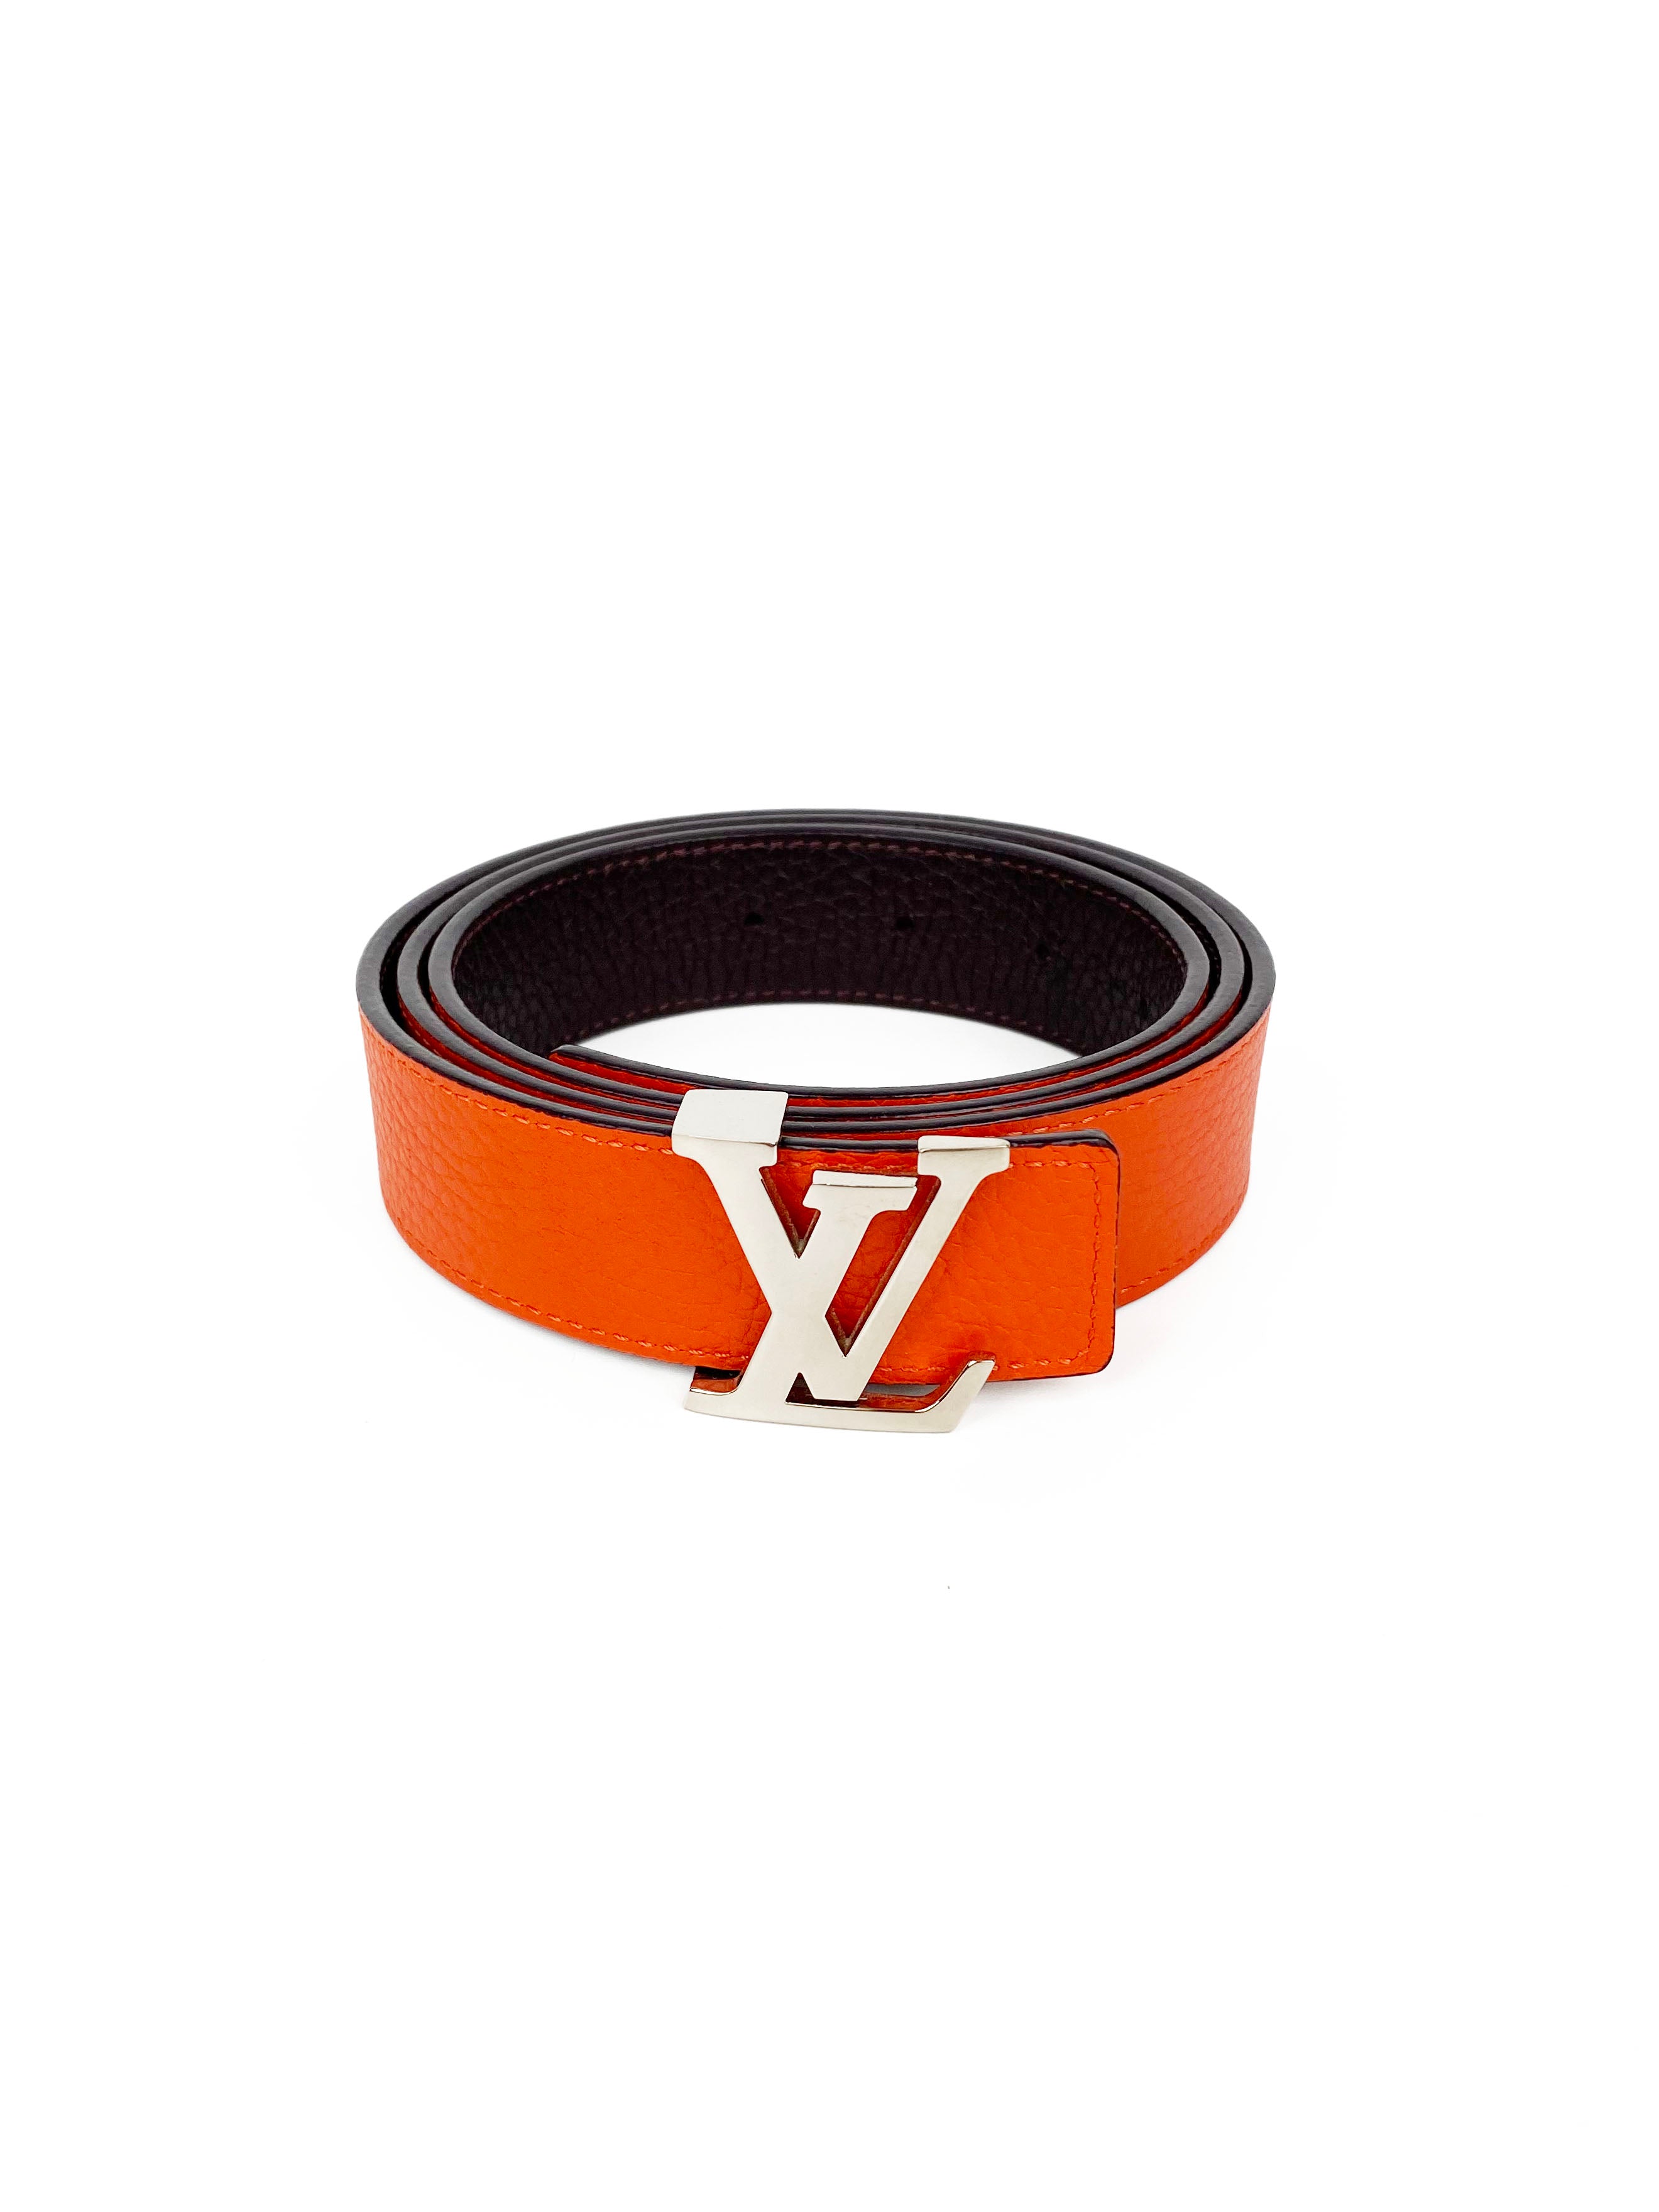 Louis Vuitton Keepall Bandouliere 50 with matted black and orange chain  LOUIS  VUITTON  THÉM